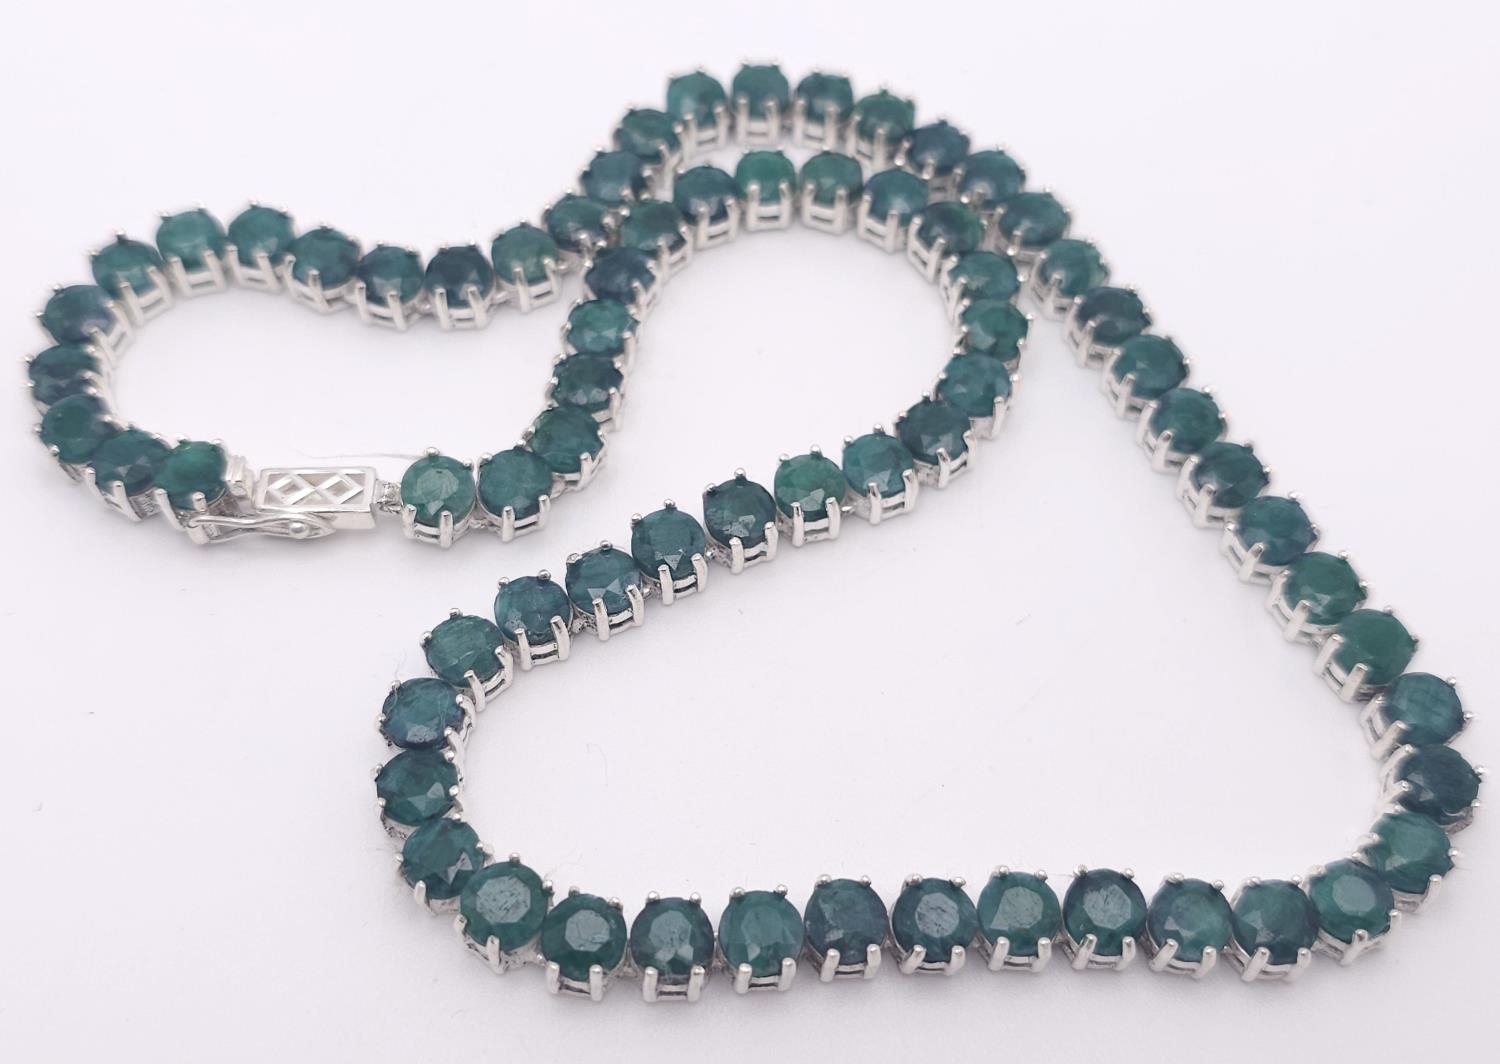 An Emerald Round Cut Tennis Necklace. Set in 925 Silver. 44cm length. 50g total weight. Ref: CD-1312 - Image 2 of 6